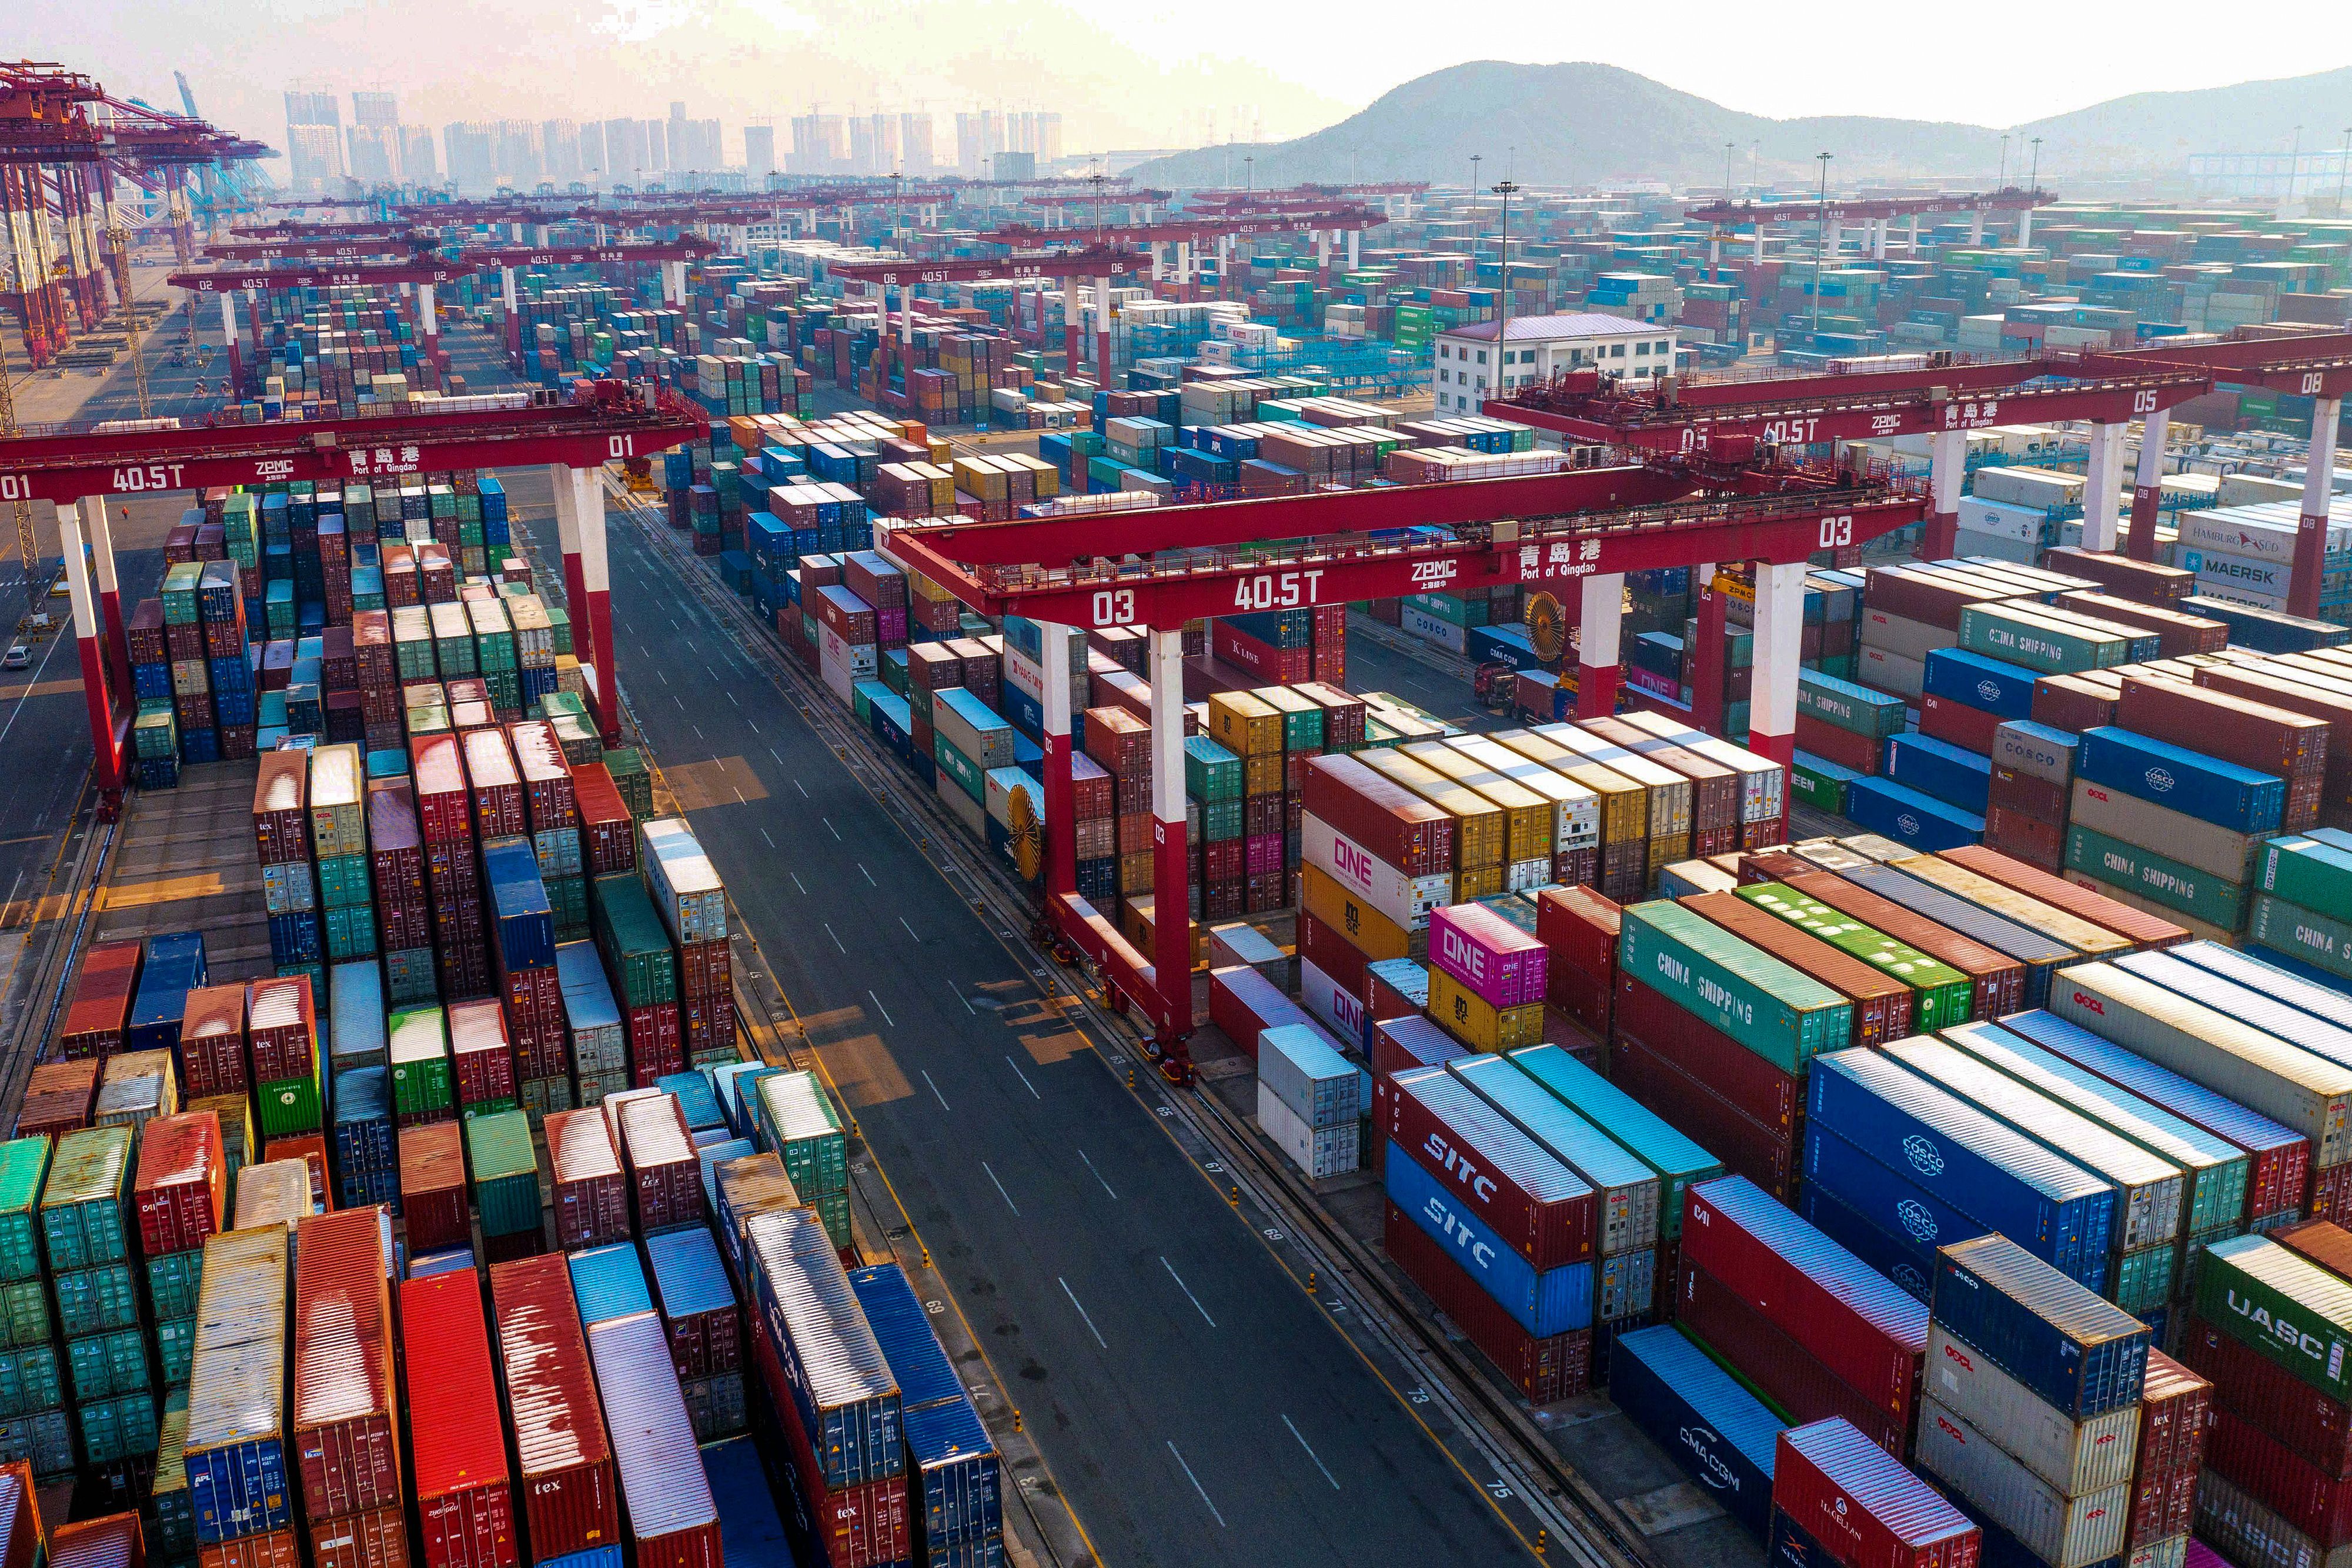 Containers are seen stacked at a port in Qingdao in China's eastern Shandong province on January 14, 2020. China's trade surplus with the United States narrowed in 2019 as the world's two biggest economies exchanged punitive tariffs in a bruising trade war (STR/AFP via Getty Images)